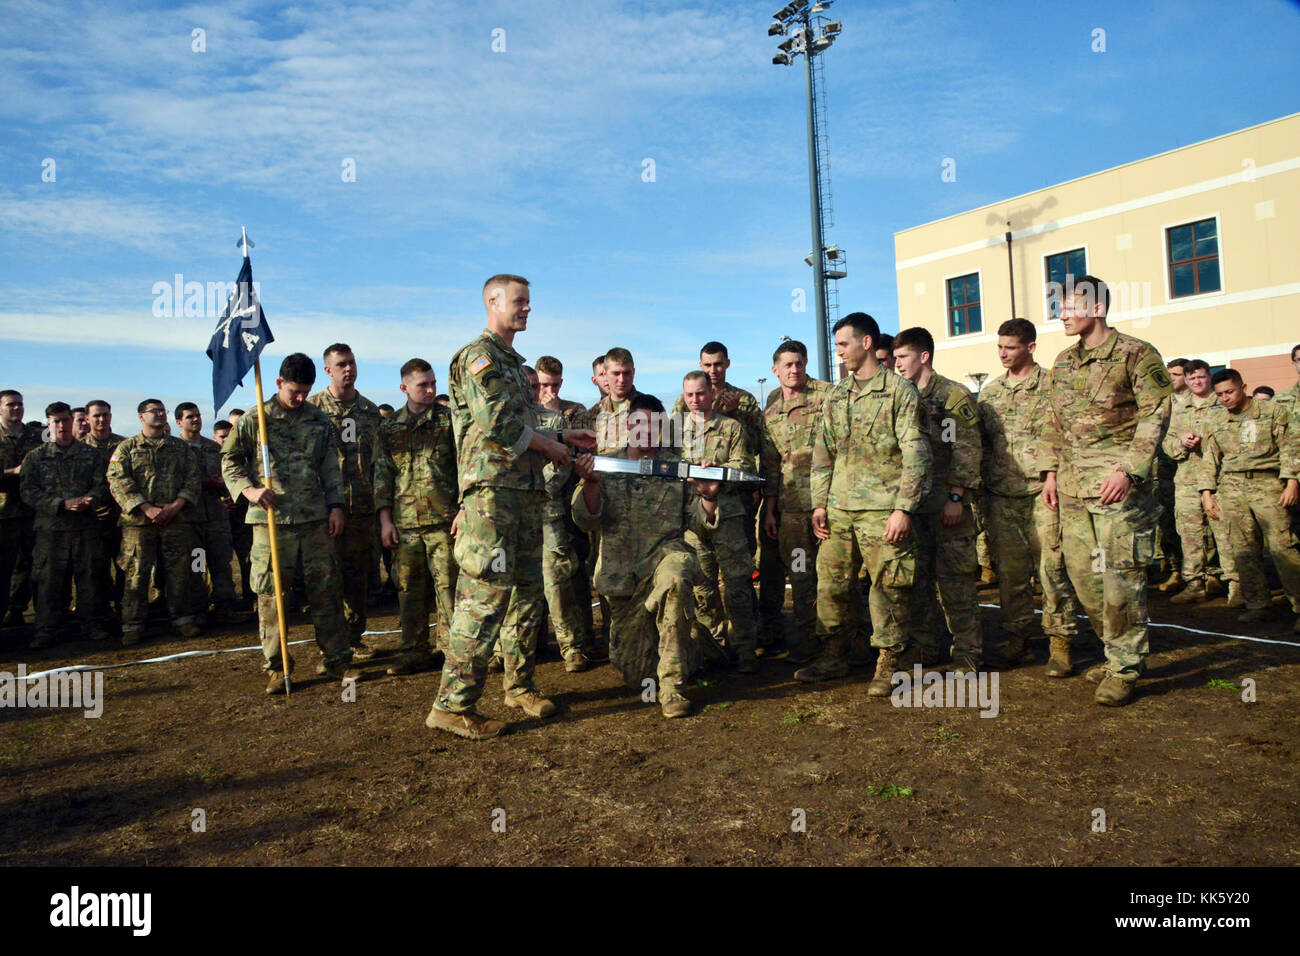 U.S. Army Lt. Col. Jim D. Keirsey (center), commander of 2nd Battalion, 503rd Infantry Regiment, 173rd Airborne Brigade, conduct a Rockvember Event for Brostrom Challenge, at Caserma Del Din, Vicenza, Italy, Nov. 8, 2017.   The 173rd Airborne Brigade is the U.S. Army Contingency Response Force in Europe, capable of projecting ready forces anywhere in the U.S. European, Africa or Central Commands areas of responsibility within 18 hours.   (U.S. Army photo by Massimo Bovo) Stock Photo